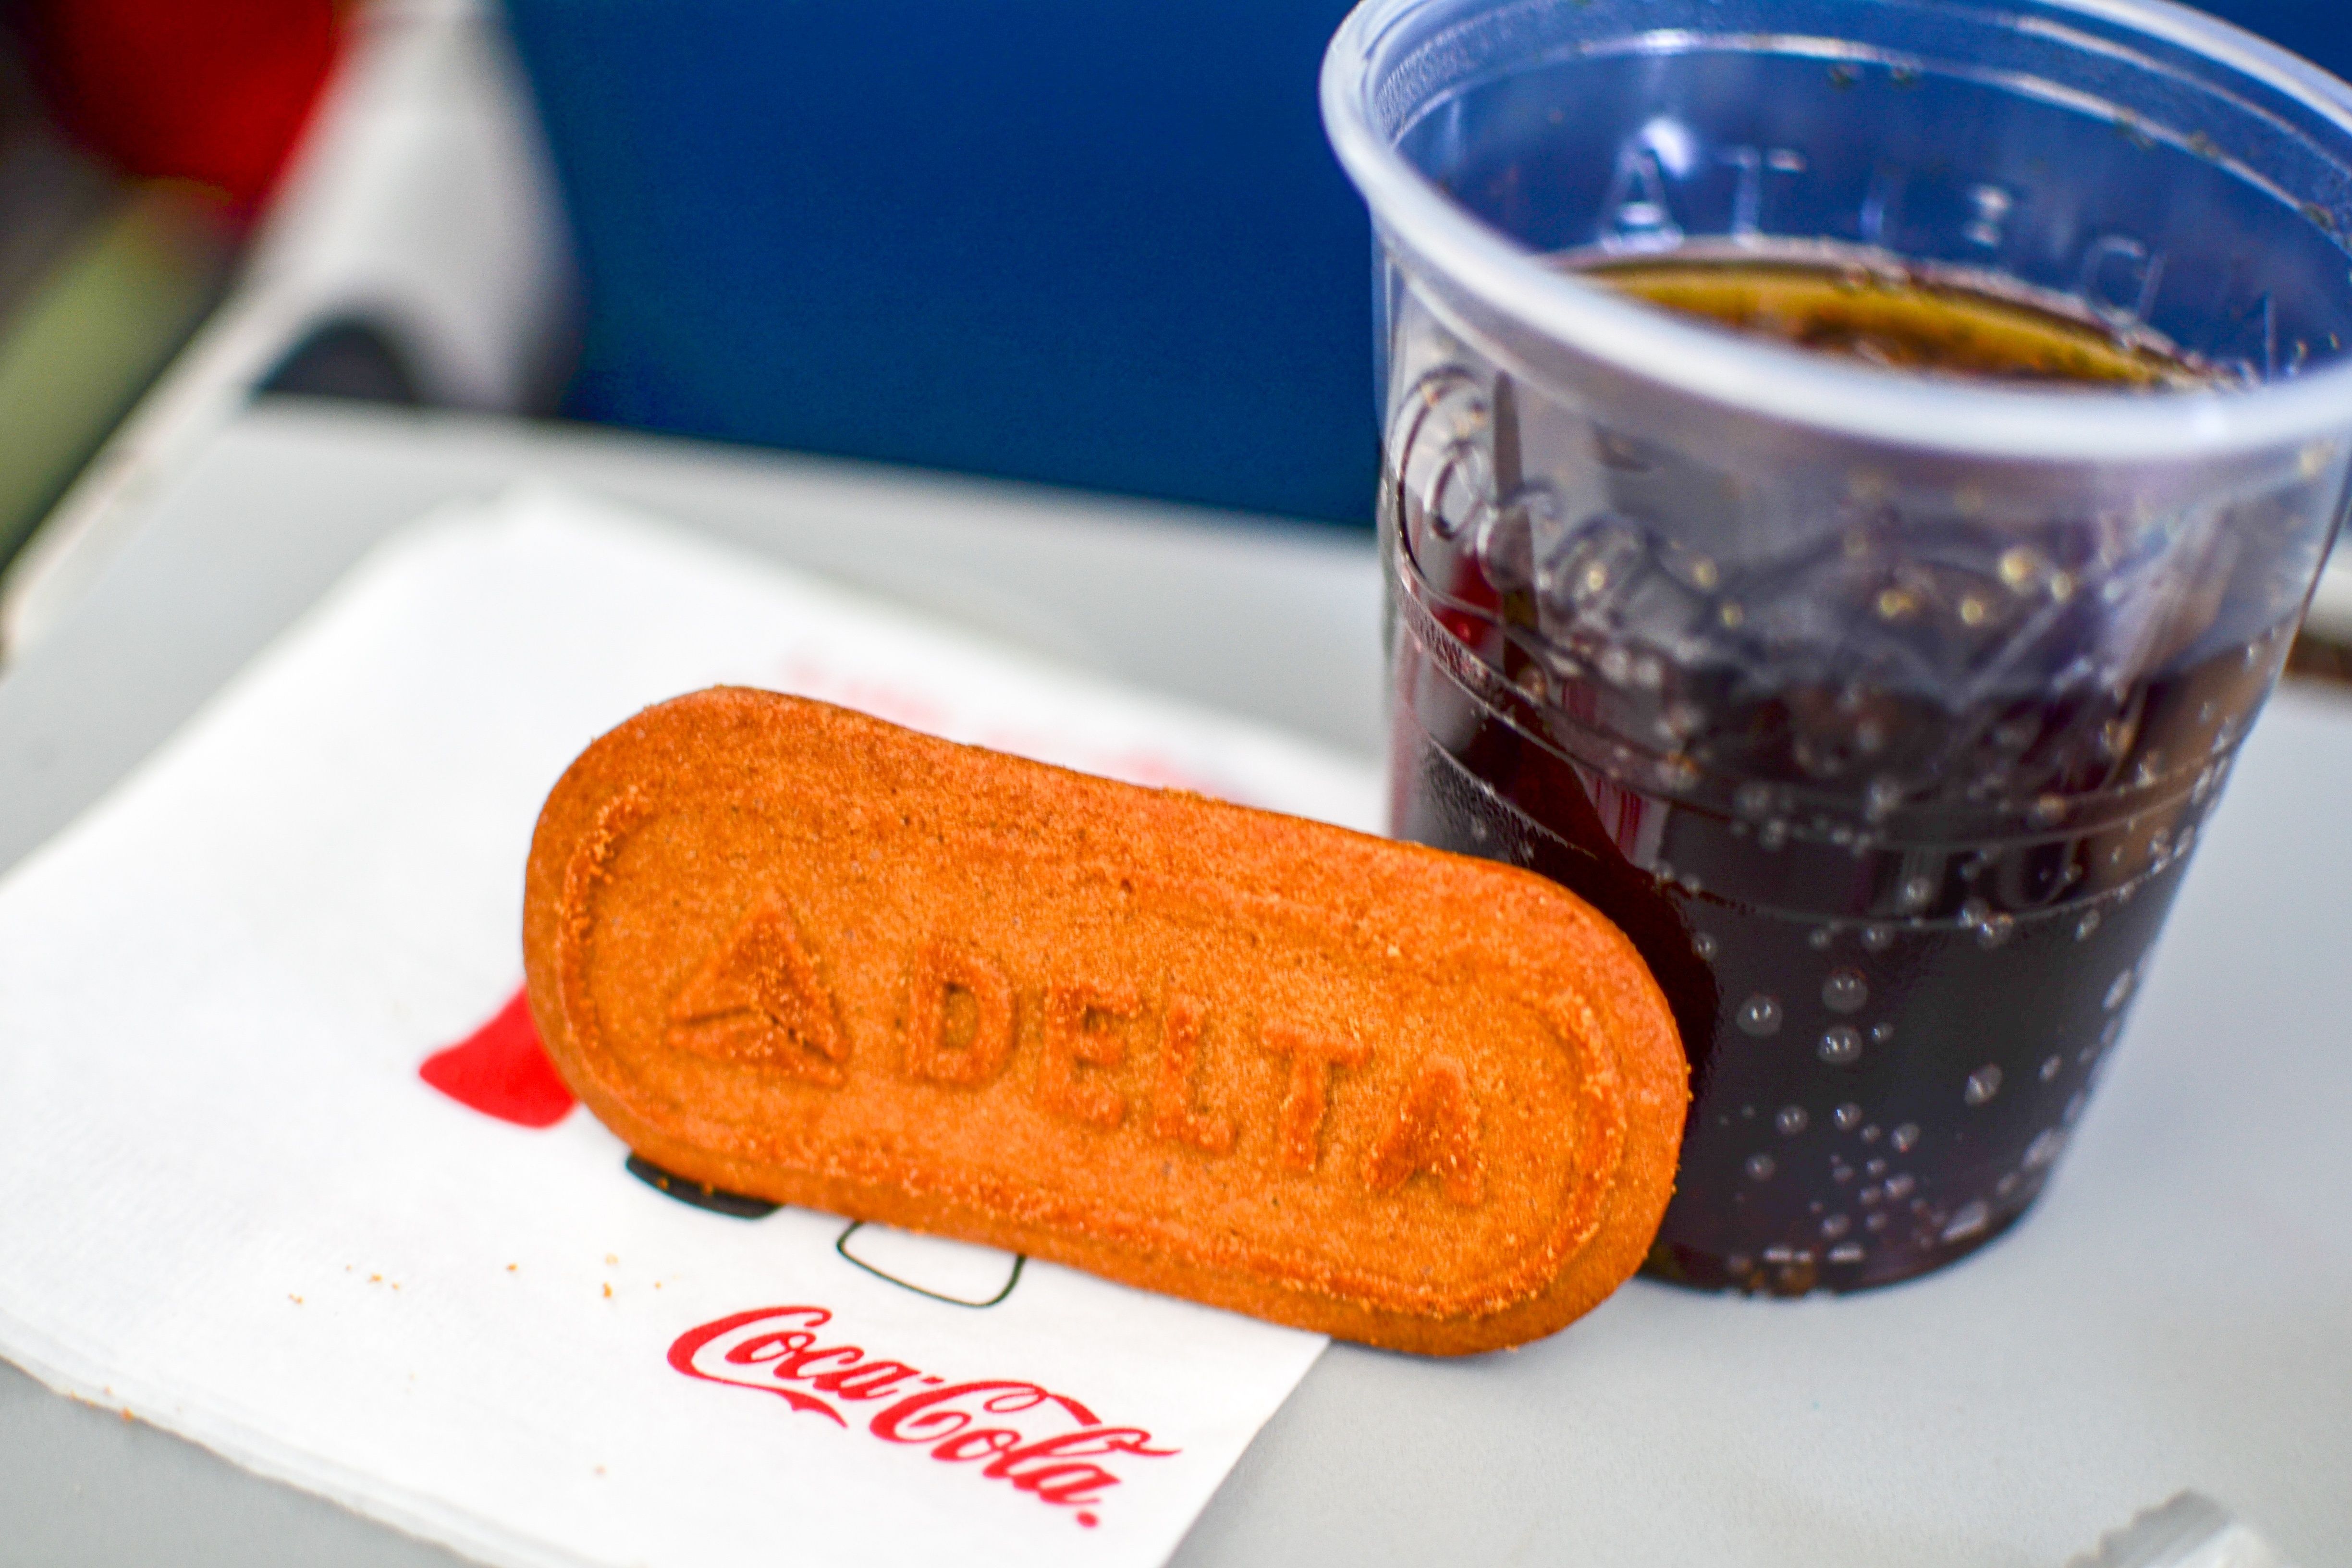 A Biscoff cookie with Delta Air Lines' logo on it, next to a coke.